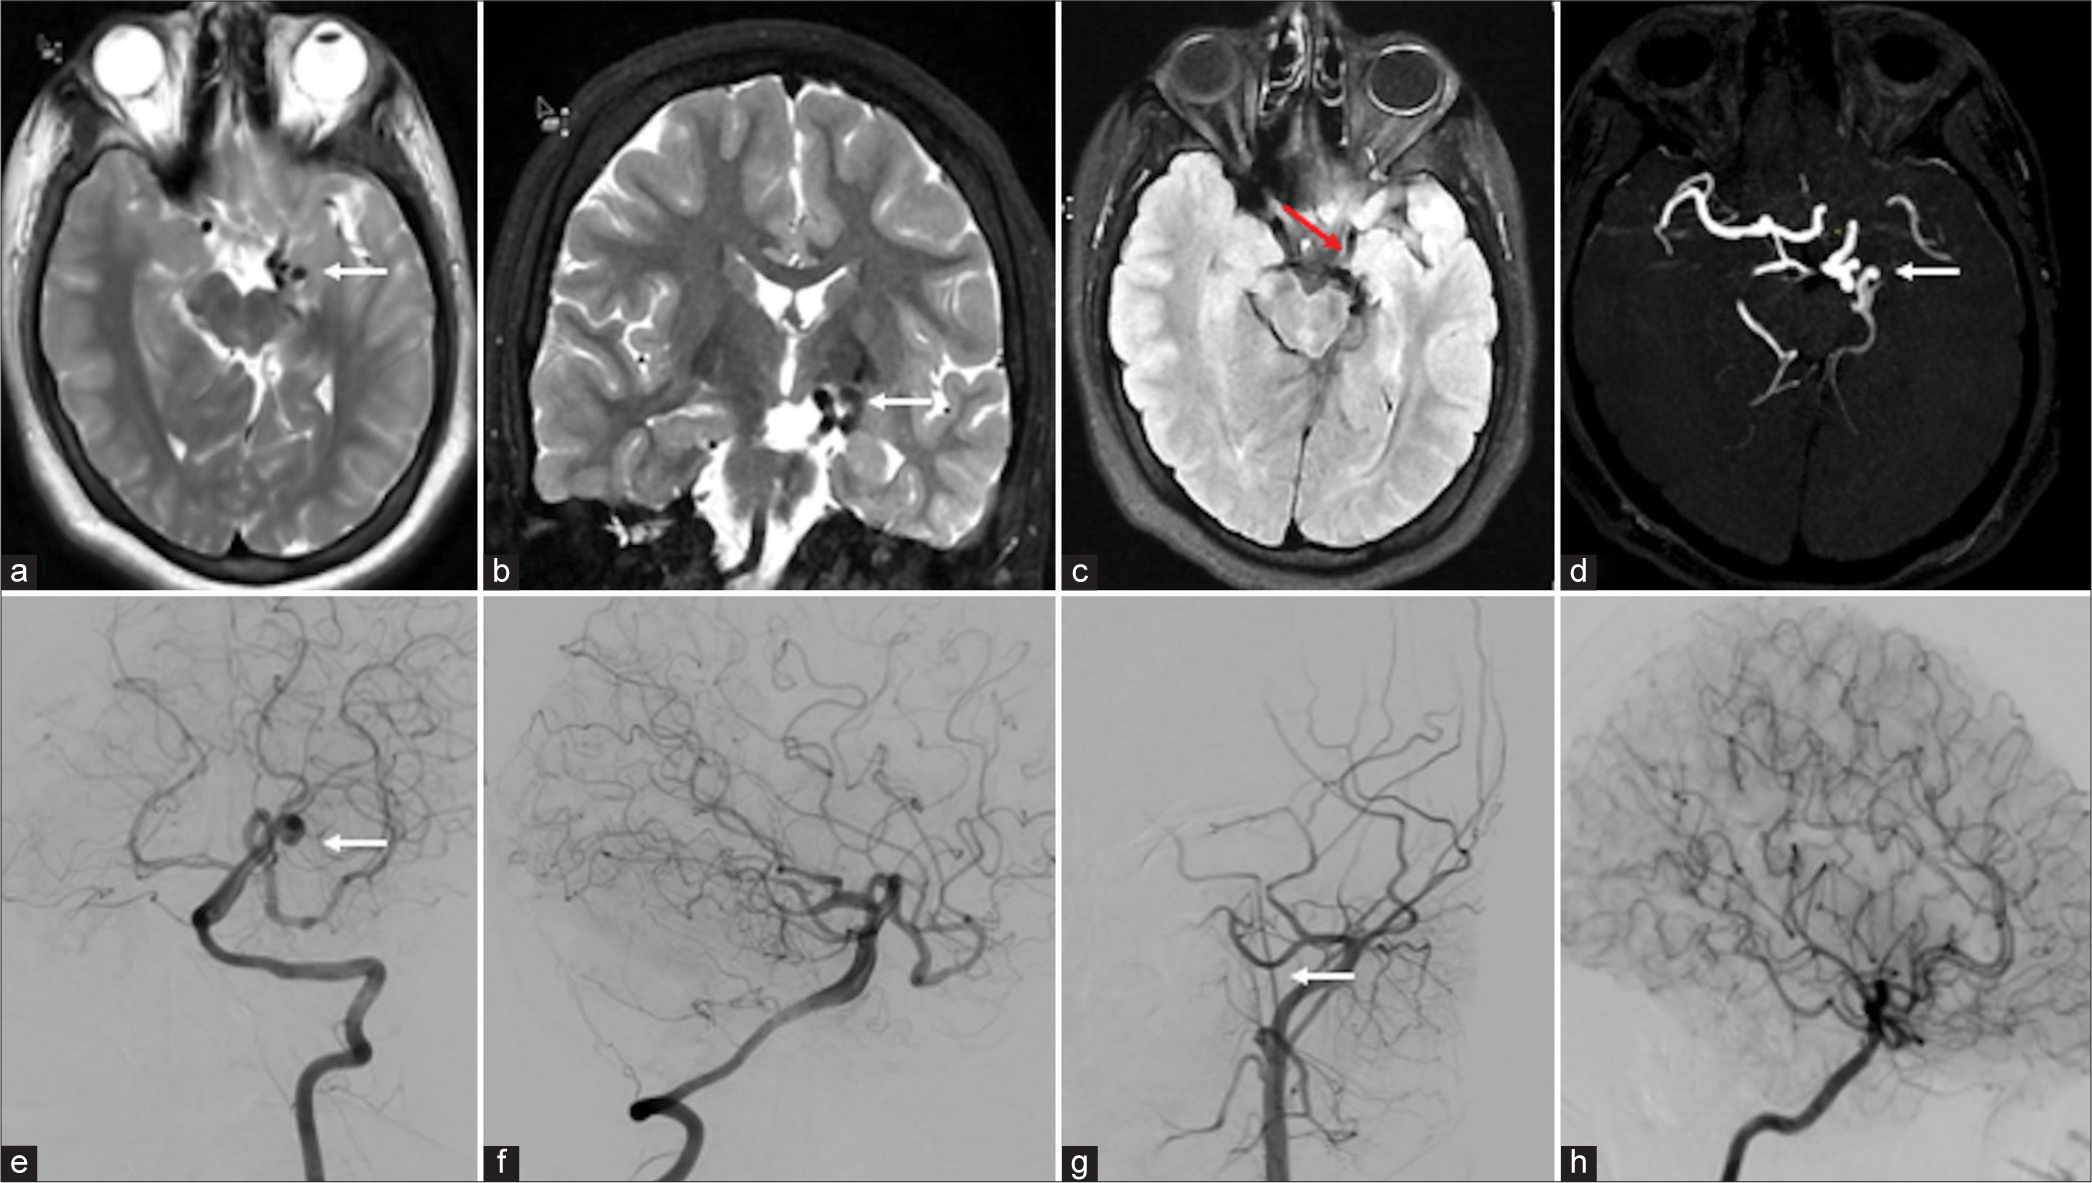 (a-d) Magnetic resonance imaging (MRI) and digital subtraction imaging showed the imaging features of pure arterial malformation (PAM) MRI image: (a) Axial T2, (b) coronal T2, and (c) axial fluid-attenuated inversion recovery showed abnormal coiled-like vessels in the left side of the suprasellar cistern (white arrows) with dysplastic left hippocampus and medial temporal lobe (red arrow). (d) Time-of-flight circle of Willis showed coiled-like vessels in the left posterior cerebral artery (PCA) without abnormal veins (white arrow). (e-h) Digital subtraction angiography image: (e and f) Vertebral artery runs showed coiled-like vessels in the left PCA without abnormal draining vein (white arrow). (g) The left common carotid artery run showed non-visualization of the left internal carotid artery (ICA) from bifurcation and continued as an ascending pharyngeal artery (white arrow). (h) The right ICA run showed multiple leptomeningeal collaterals in the right cerebral parenchyma.